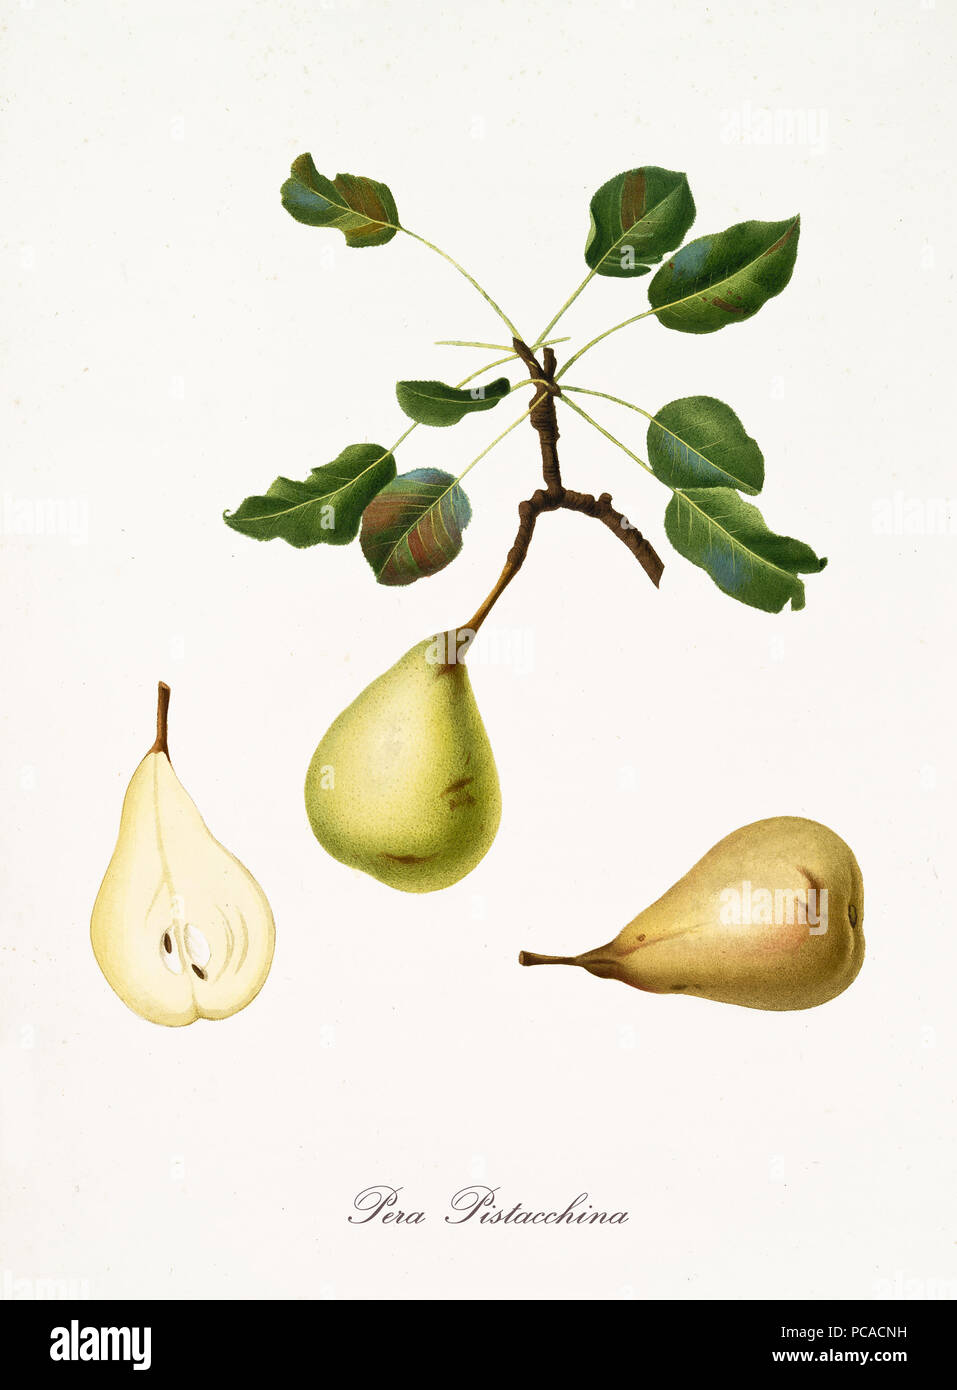 Pear, pistacchina pear, on a single branch with pear leaves on white background and fruit section. Old botanical illustration realized with a detailed watercolor by Giorgio Gallesio on 1817,1839 Italy Stock Photo